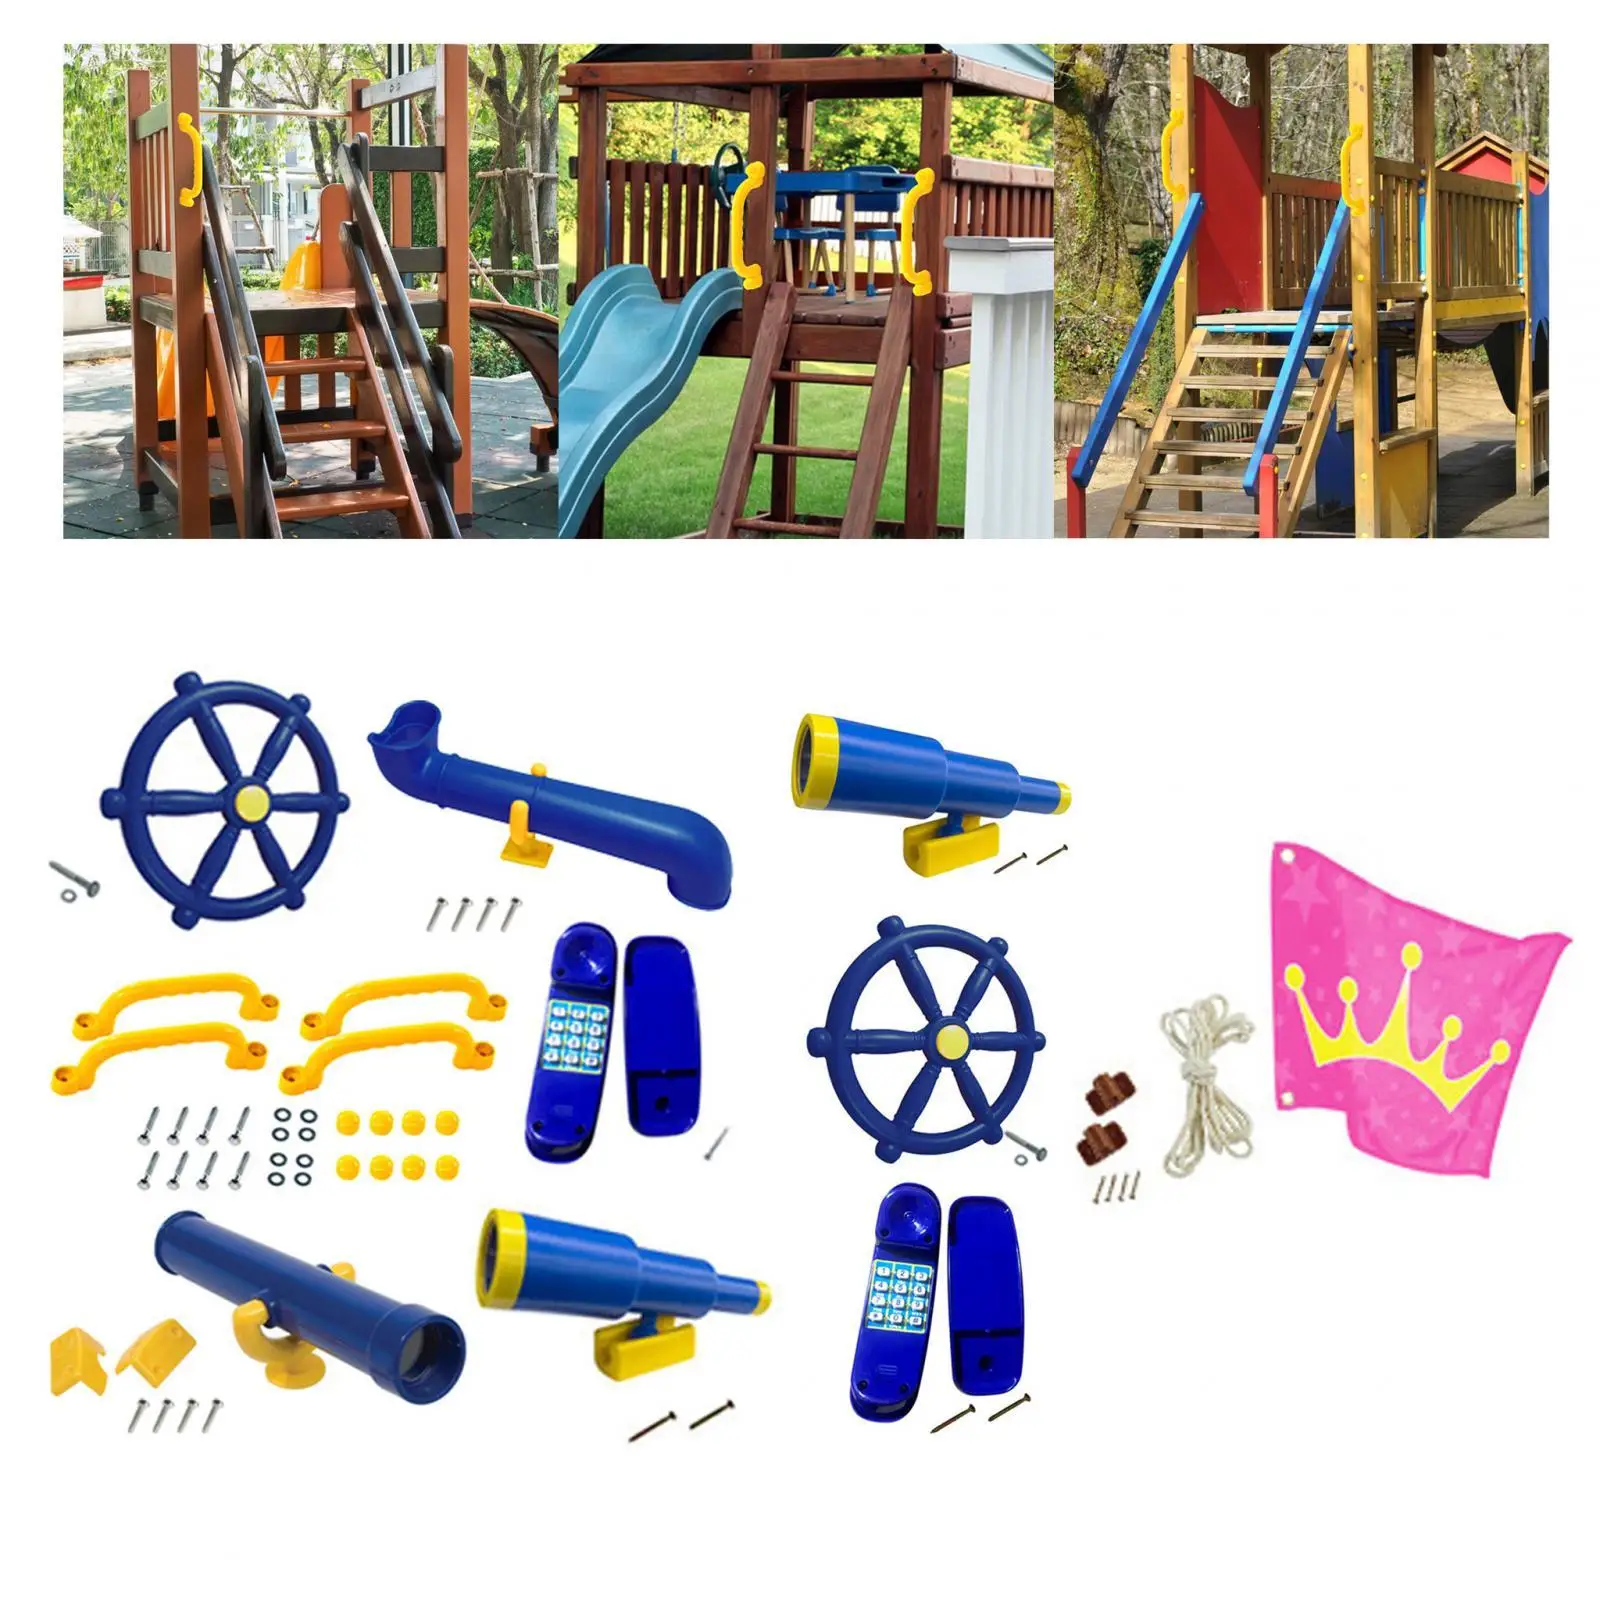 Playground Equipment Easy to Install Sports Toy Accessories Pirate Ship Parts for Backyard Tree House Playhouse Children Gifts